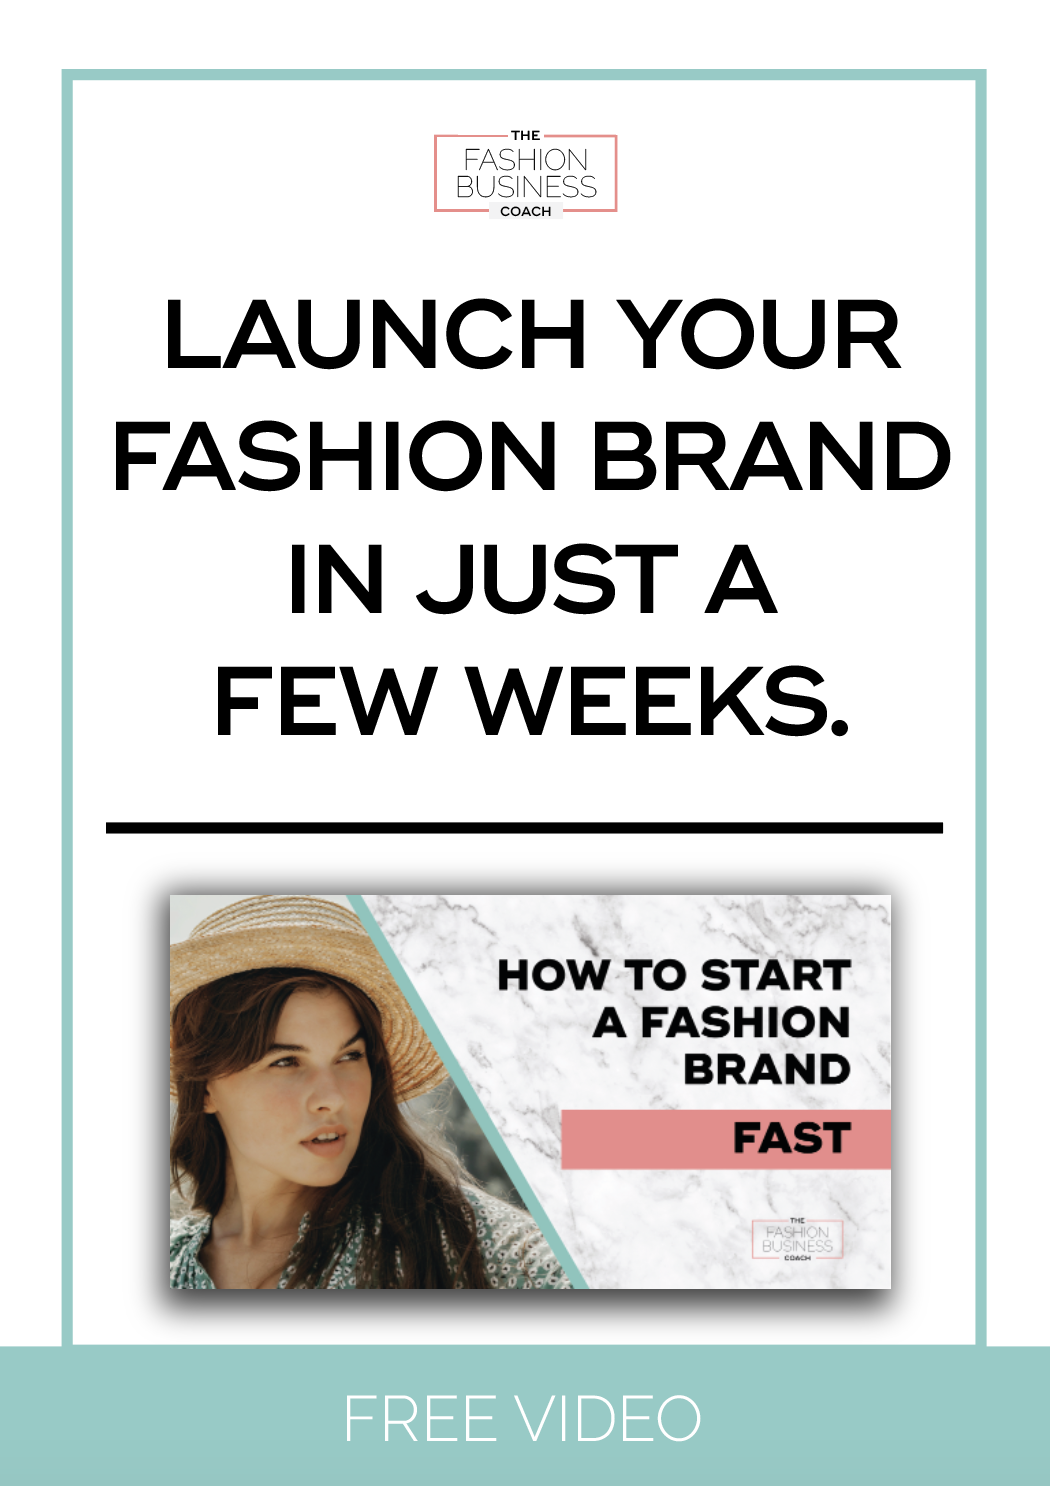 How to launch your fashion brand